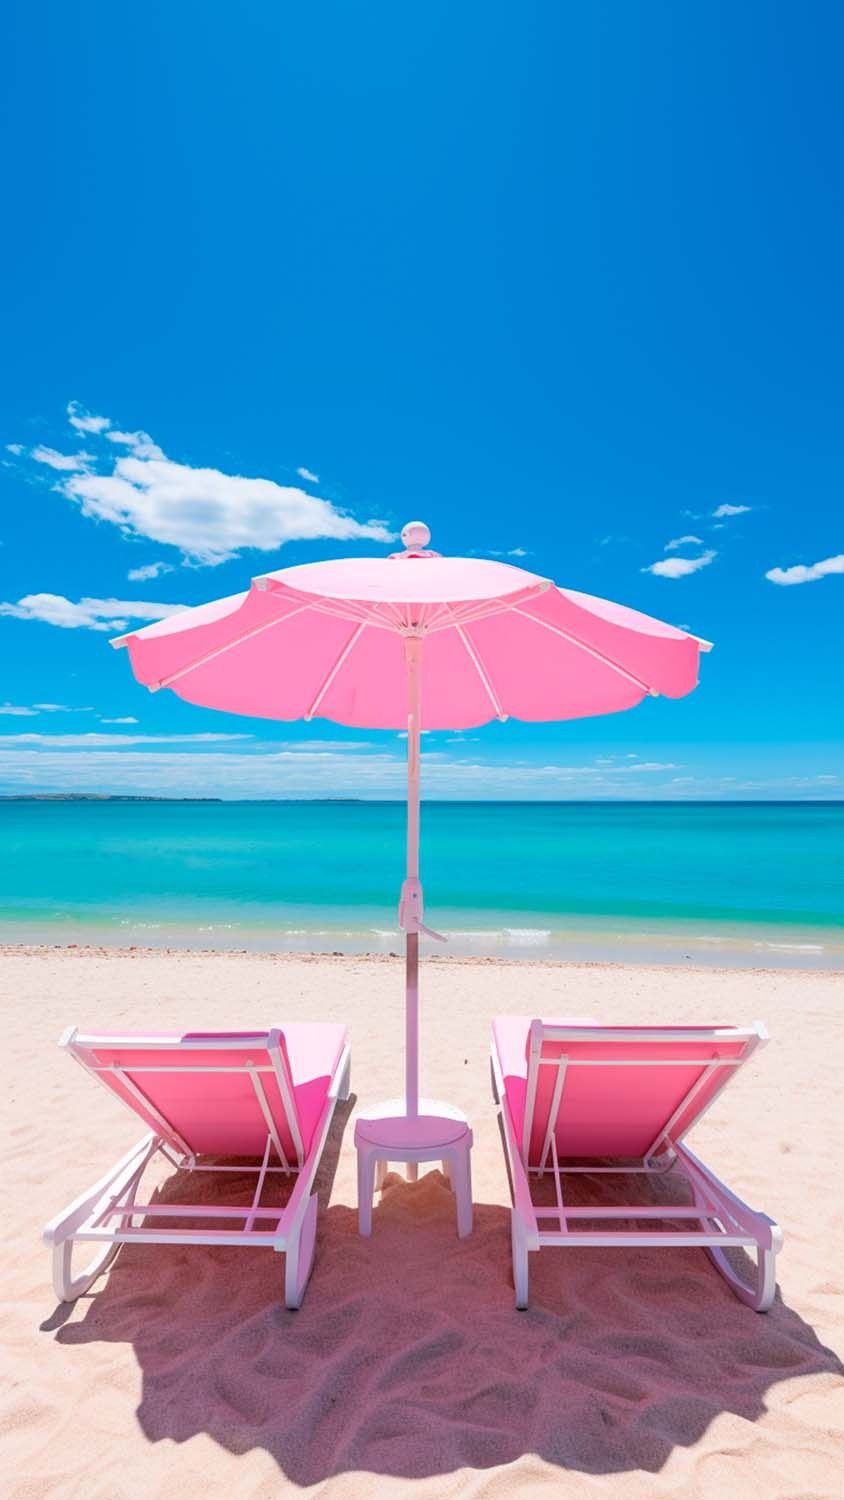 Beach Chairs iPhone Wallpaper  iPhone Wallpapers